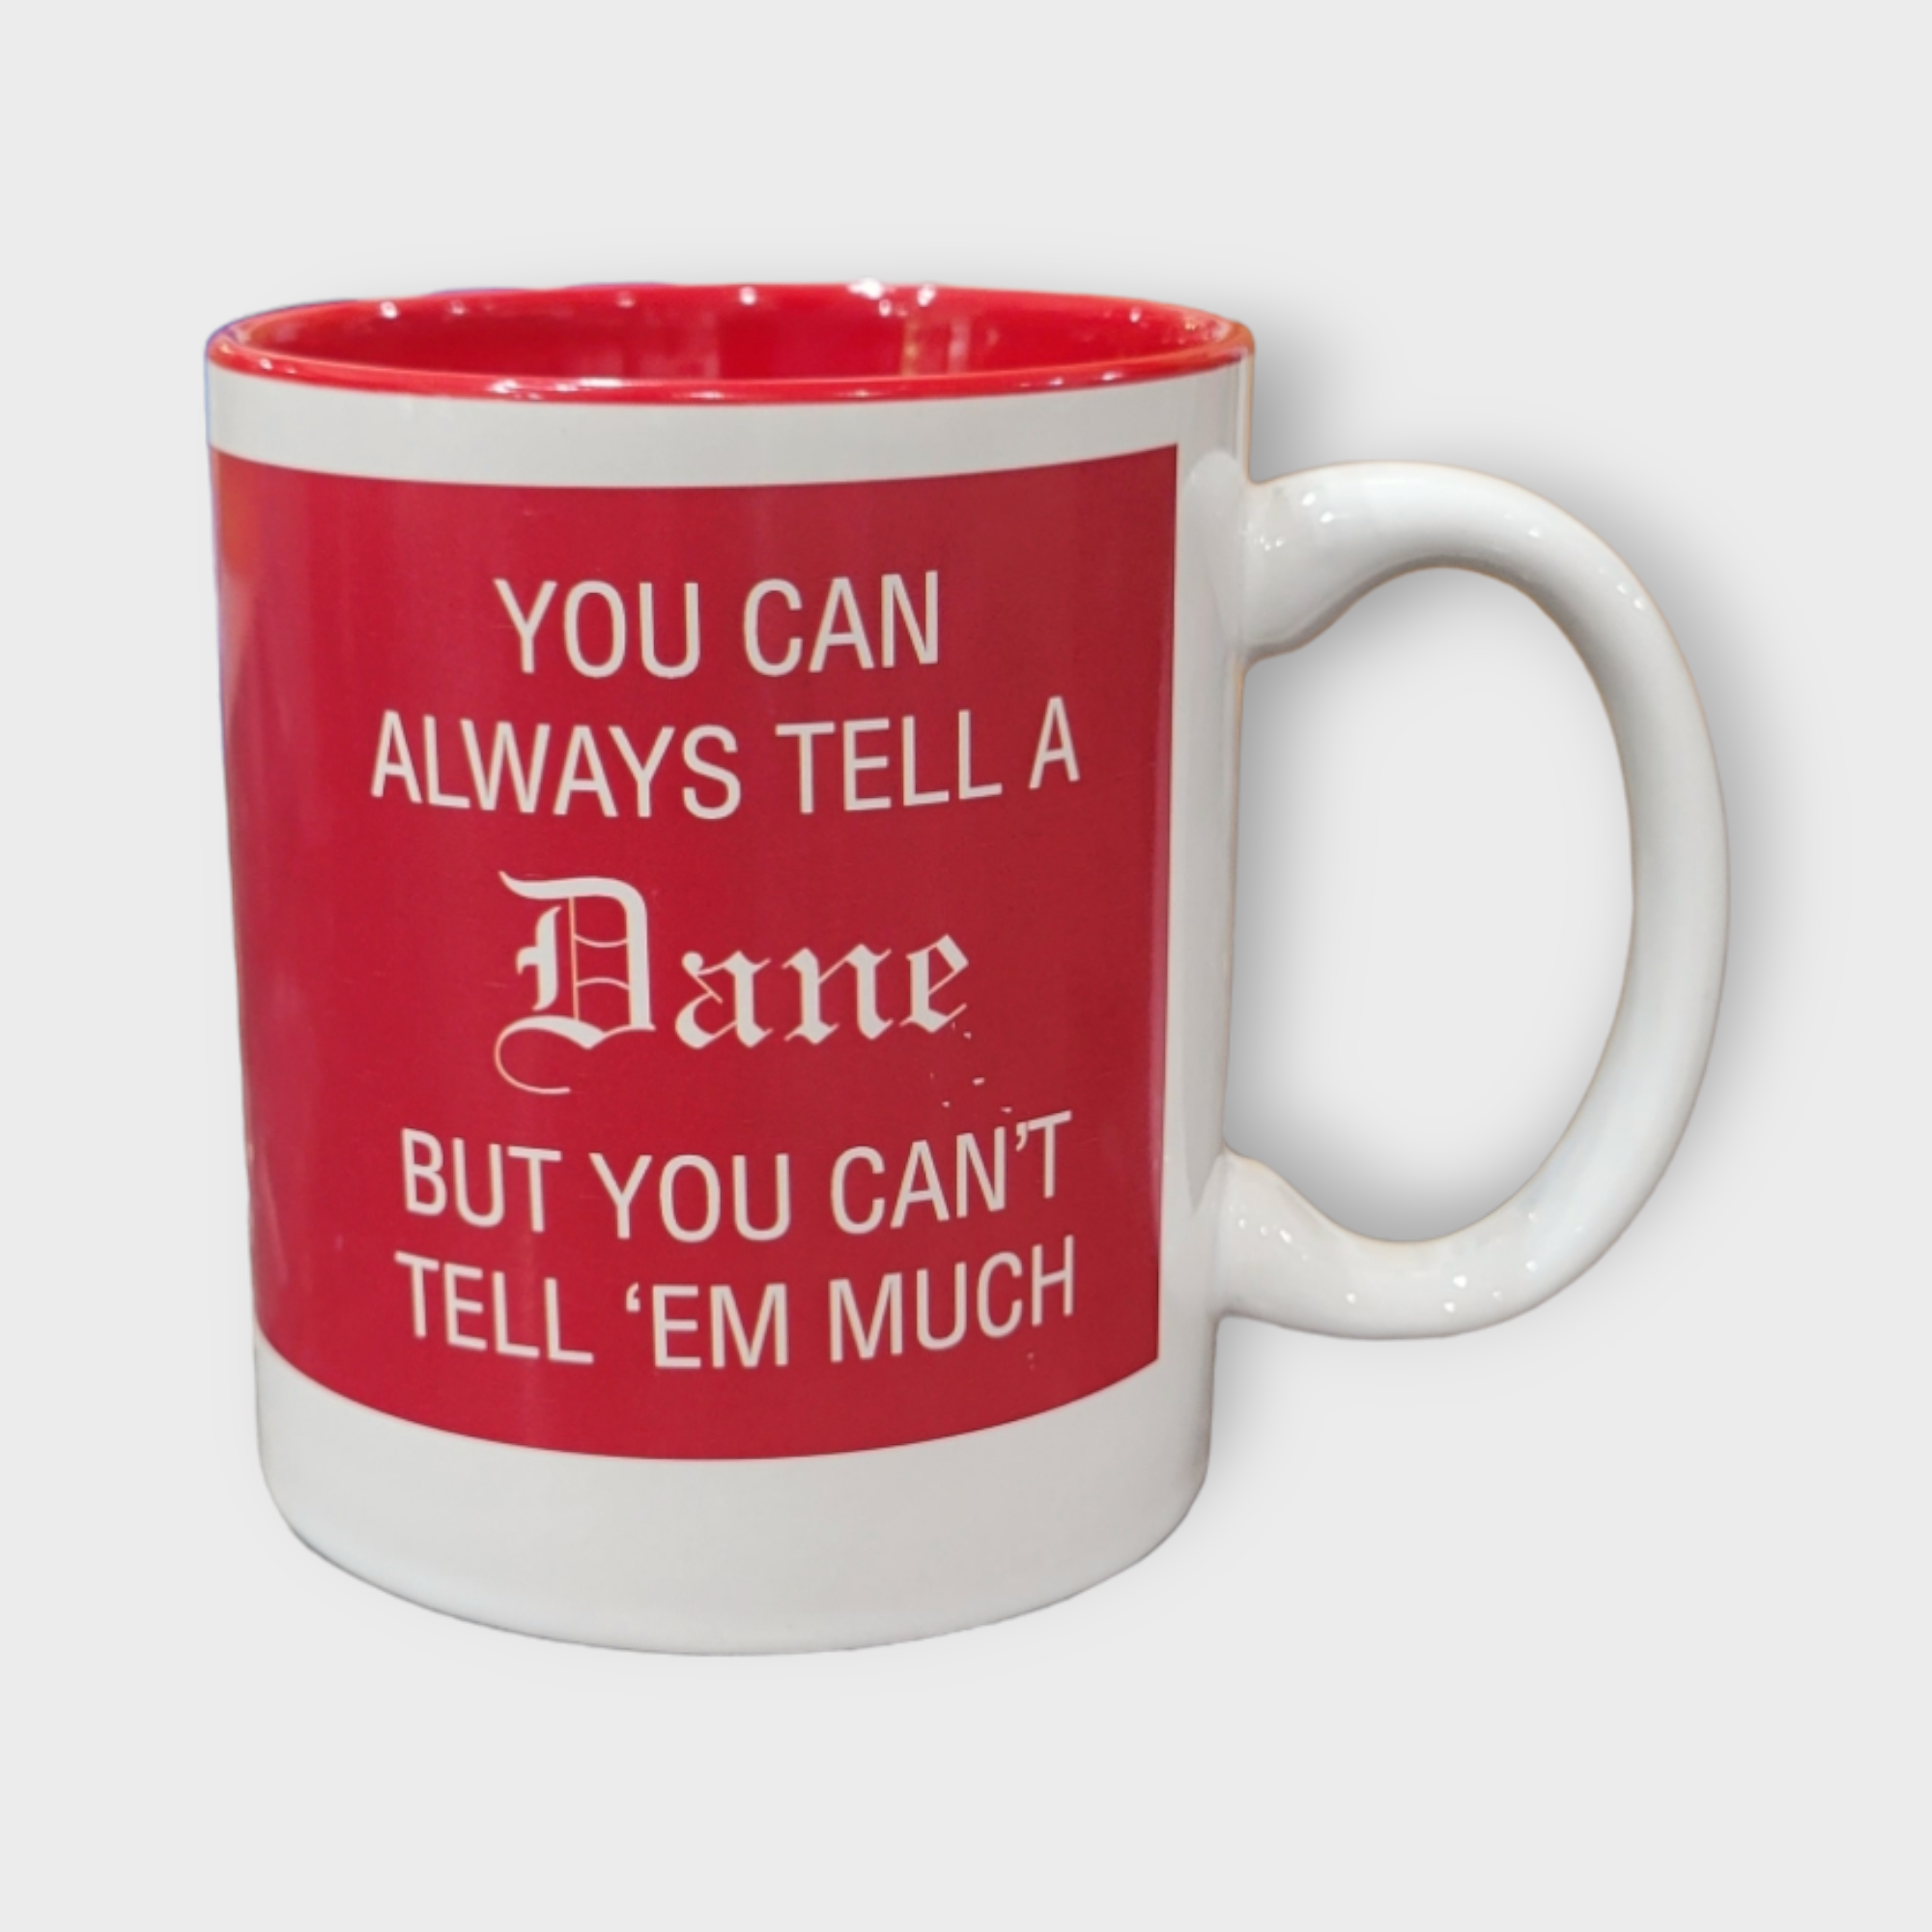 Mug: "You Can Always Tell A Dane But You Can't Tell 'Em Much" (11oz)